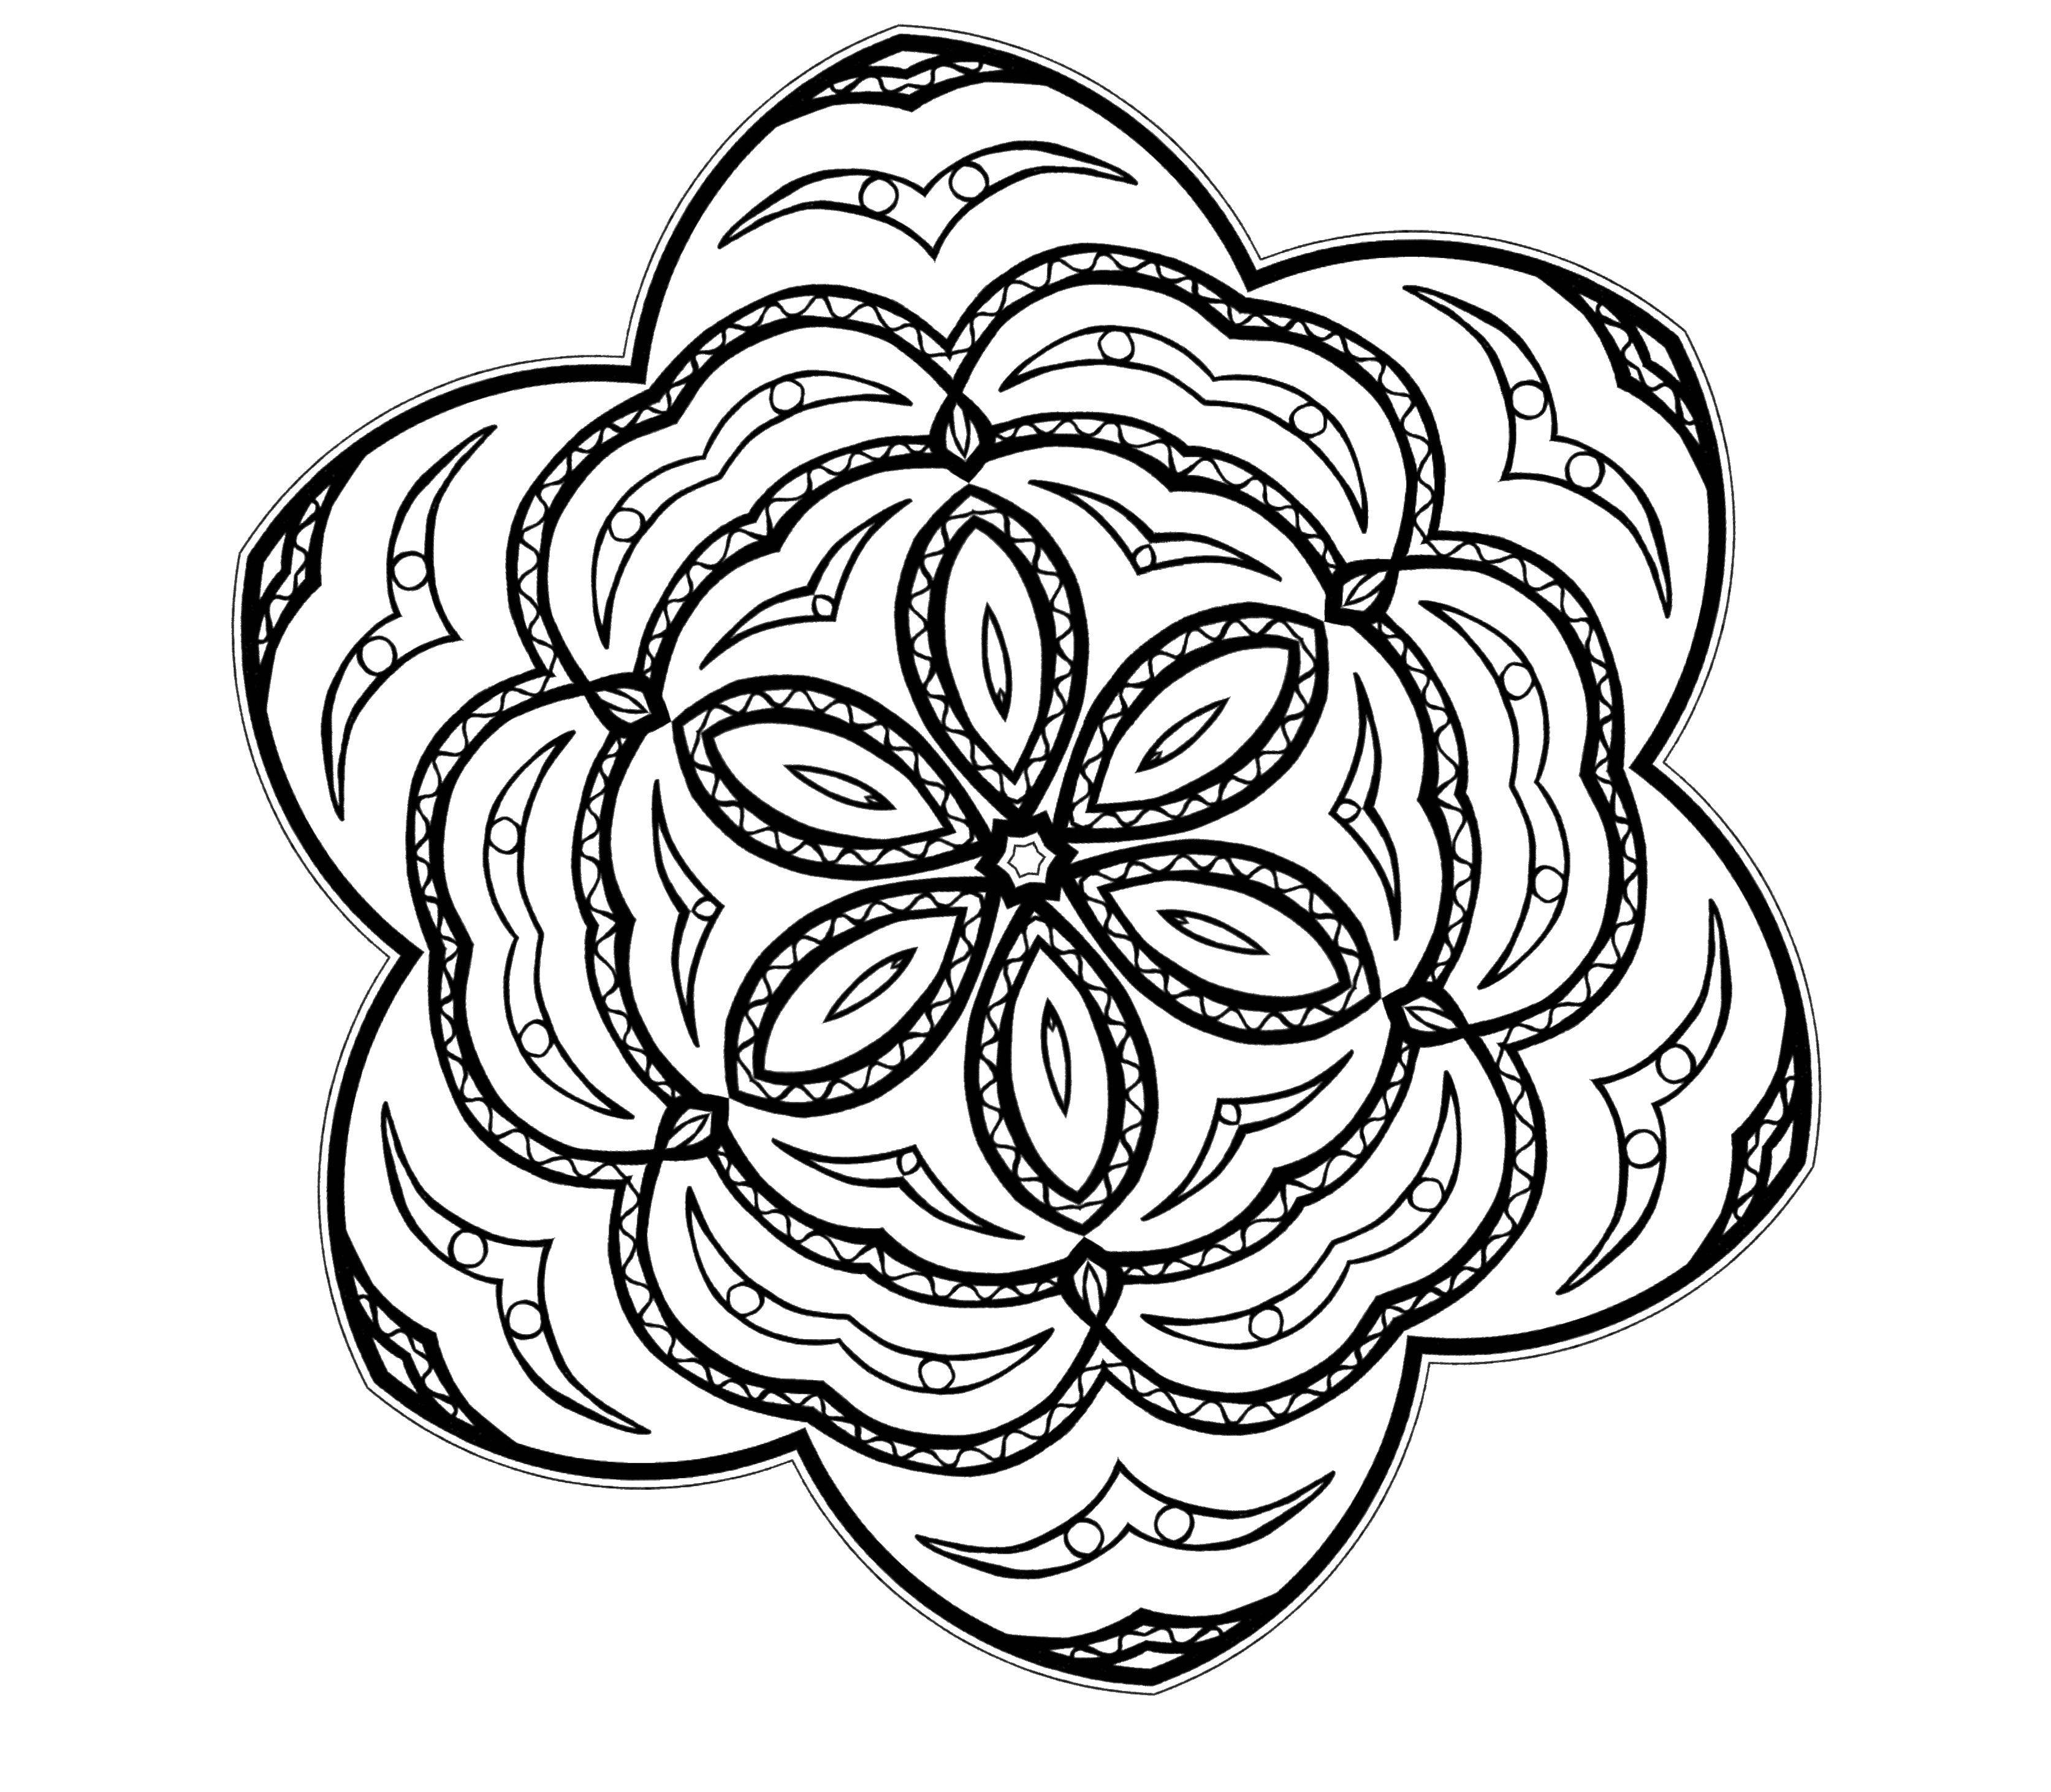 Coloring Flower. Category flowers. Tags:  flowers, plants, patterns.